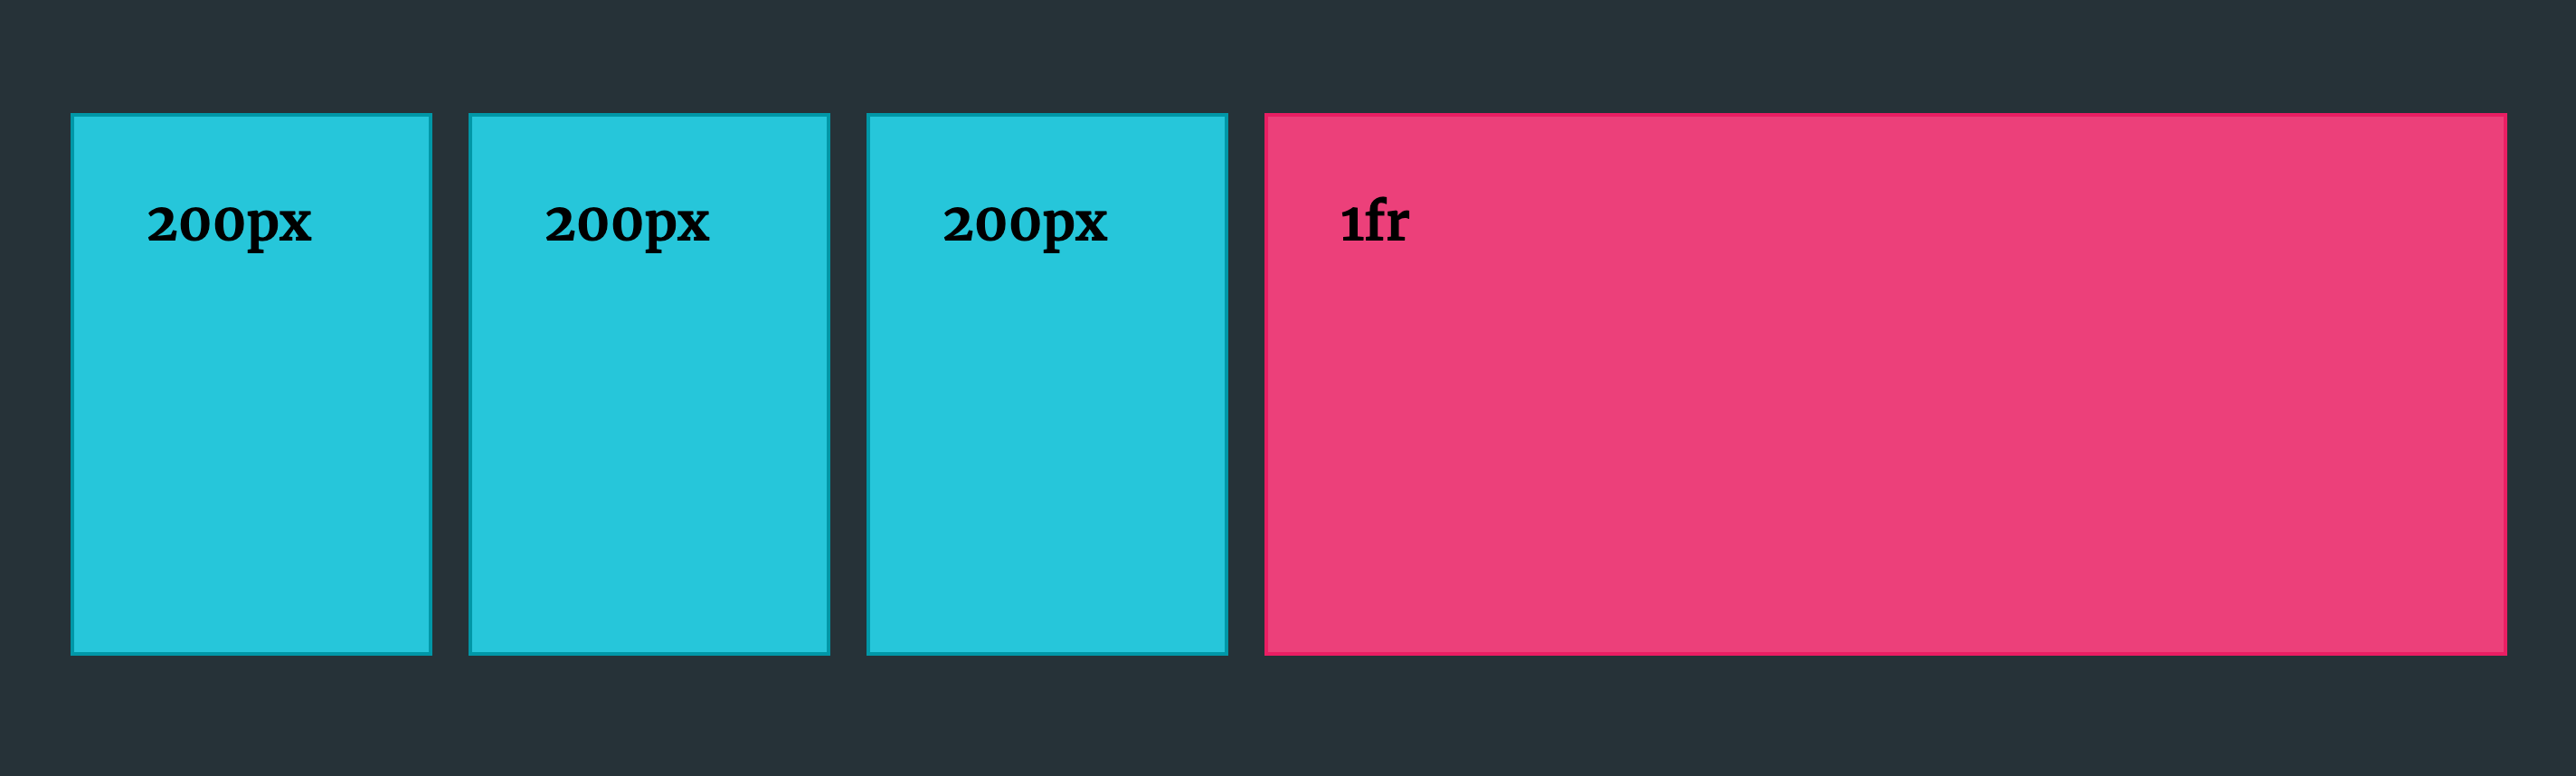 Three grid items of 200px and one grid item of 1fr